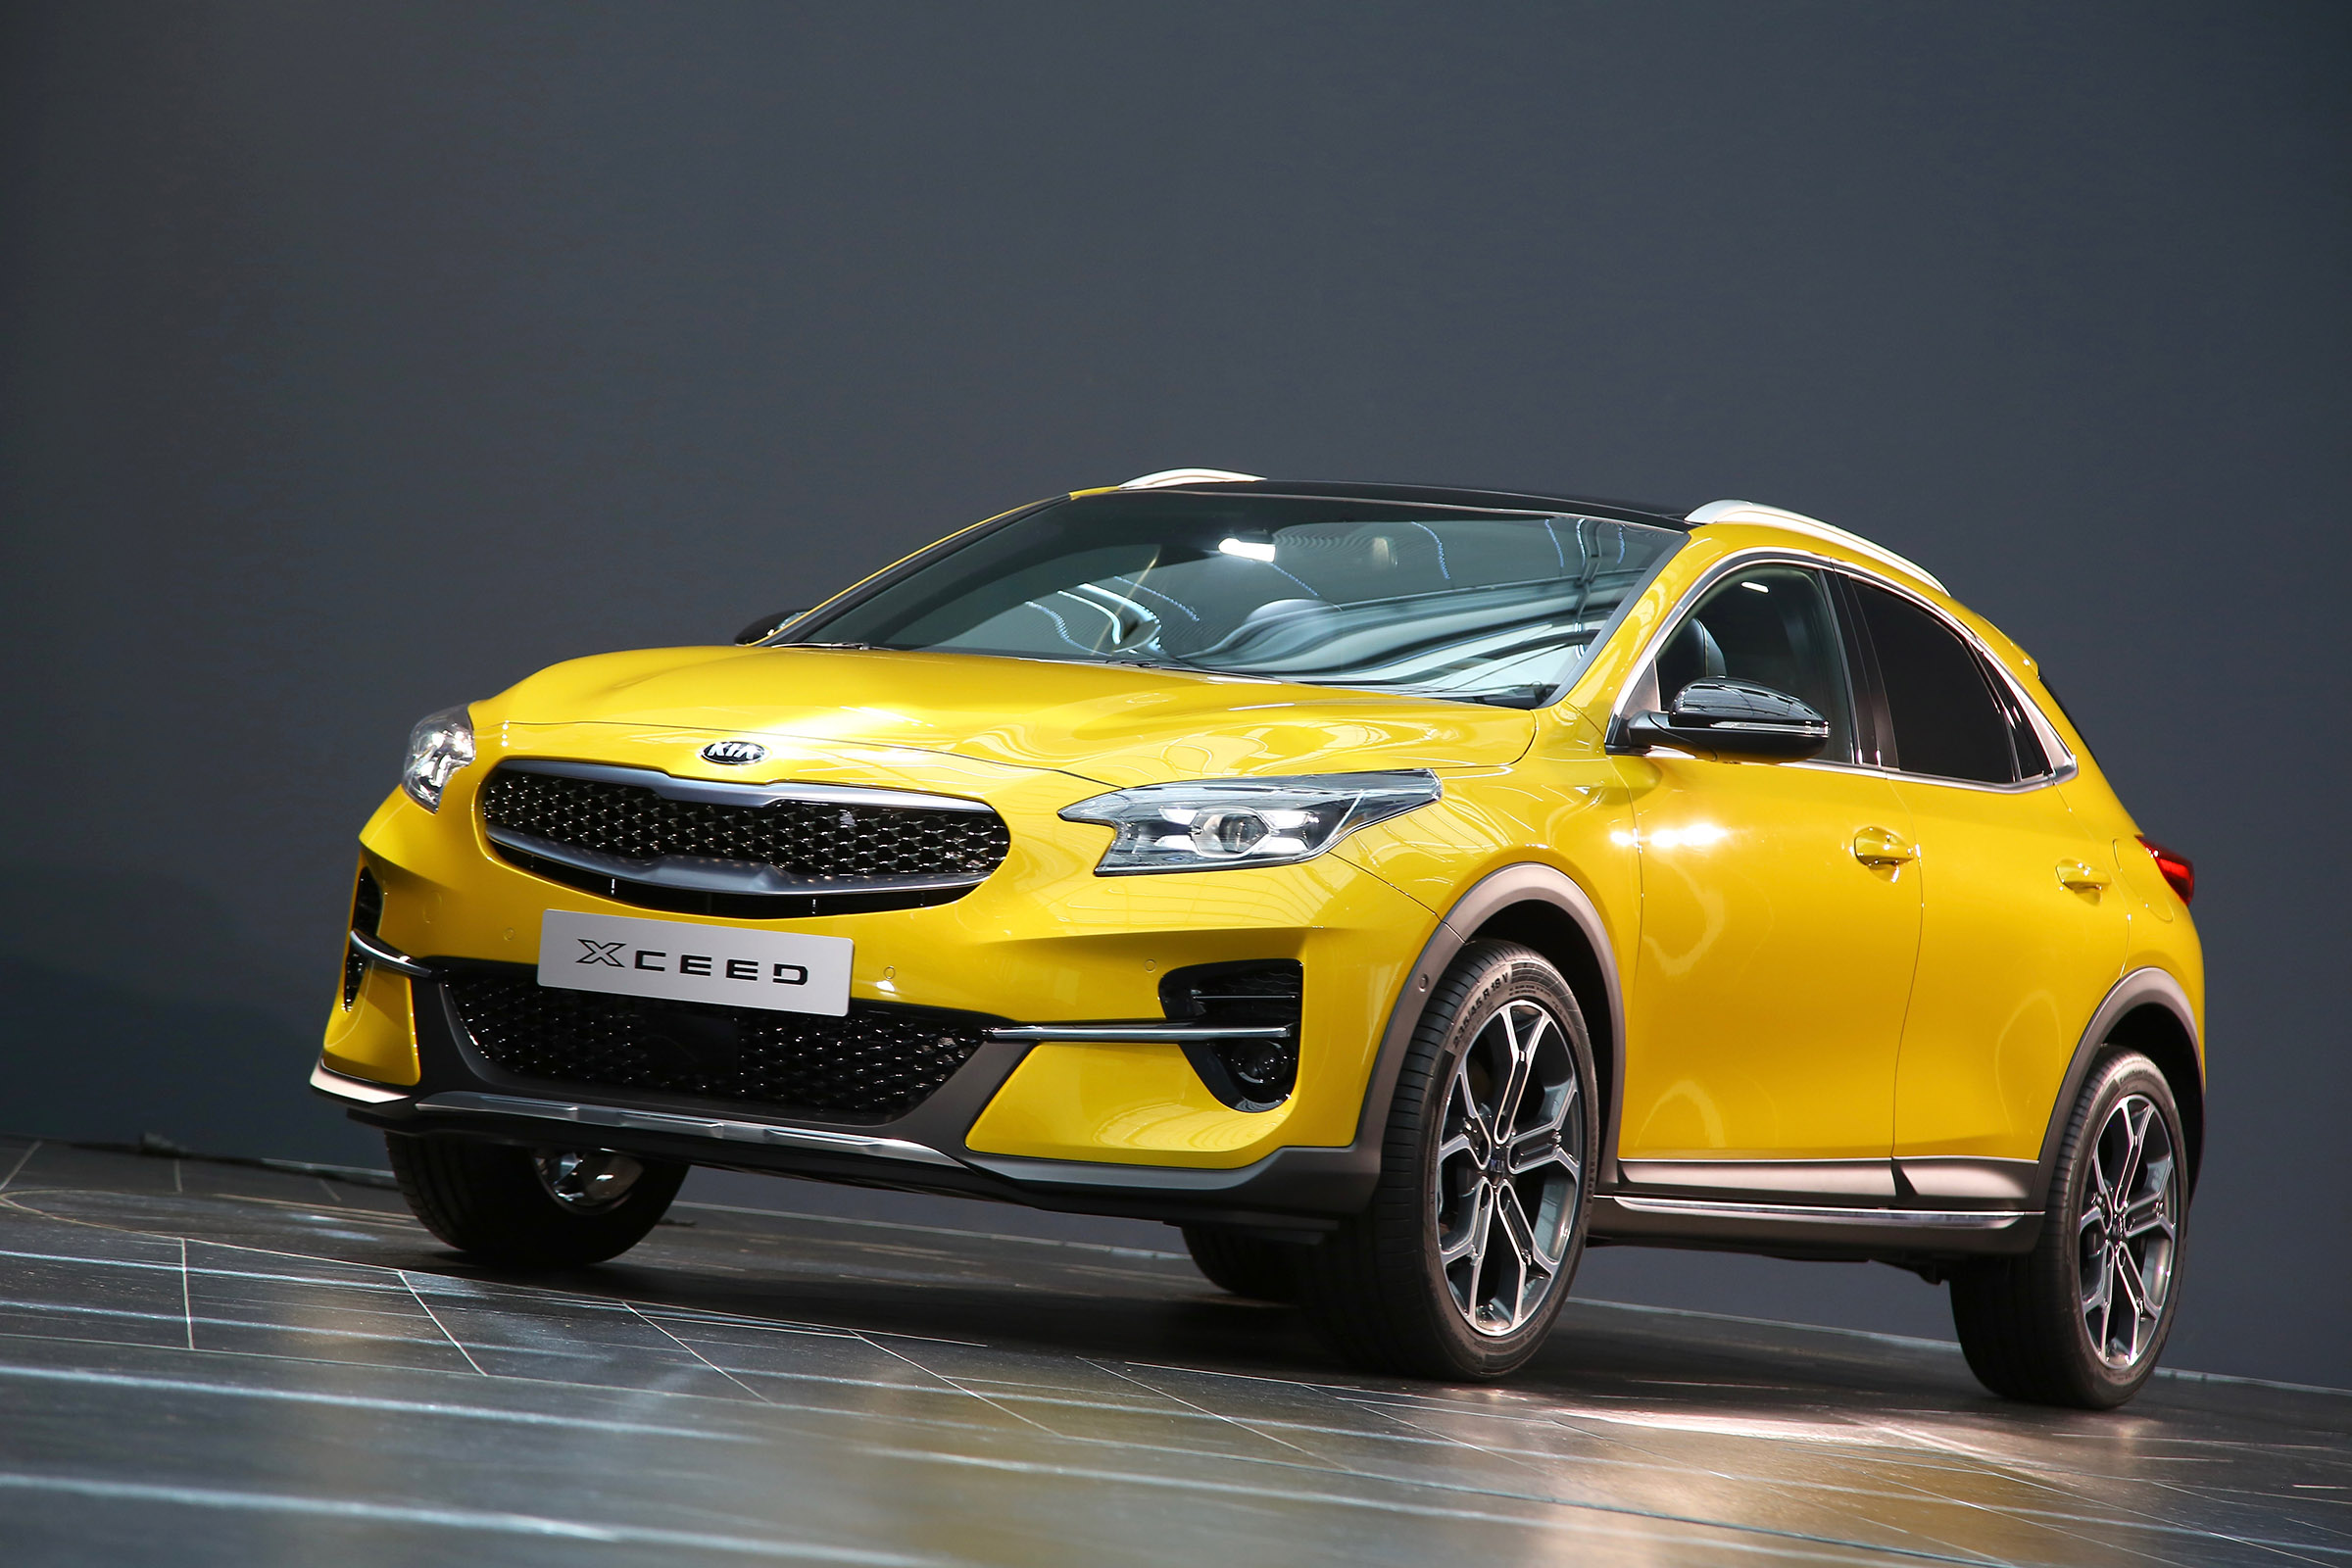 New 2019 Kia Xceed crossover prices and specs revealed 